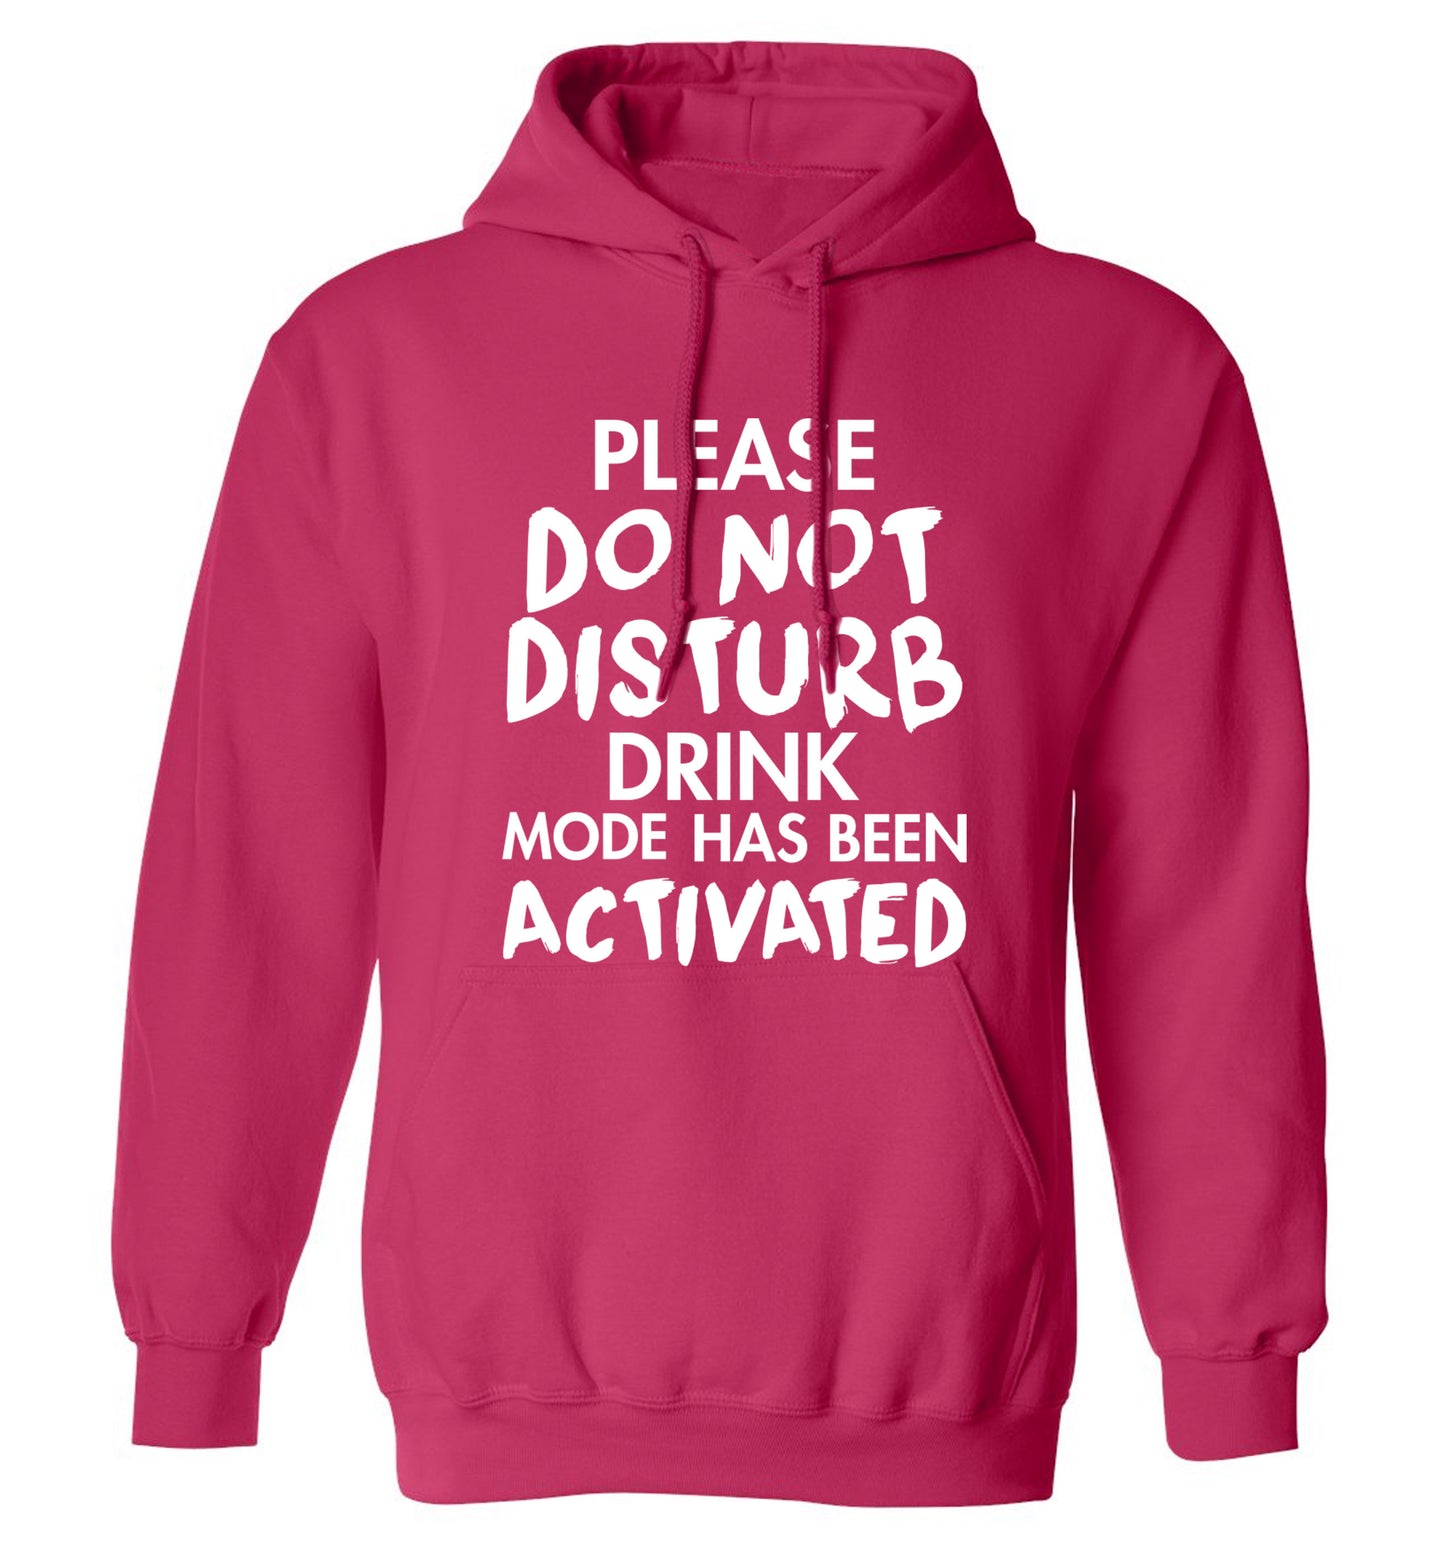 Please do not disturb drink mode has been activated adults unisex pink hoodie 2XL